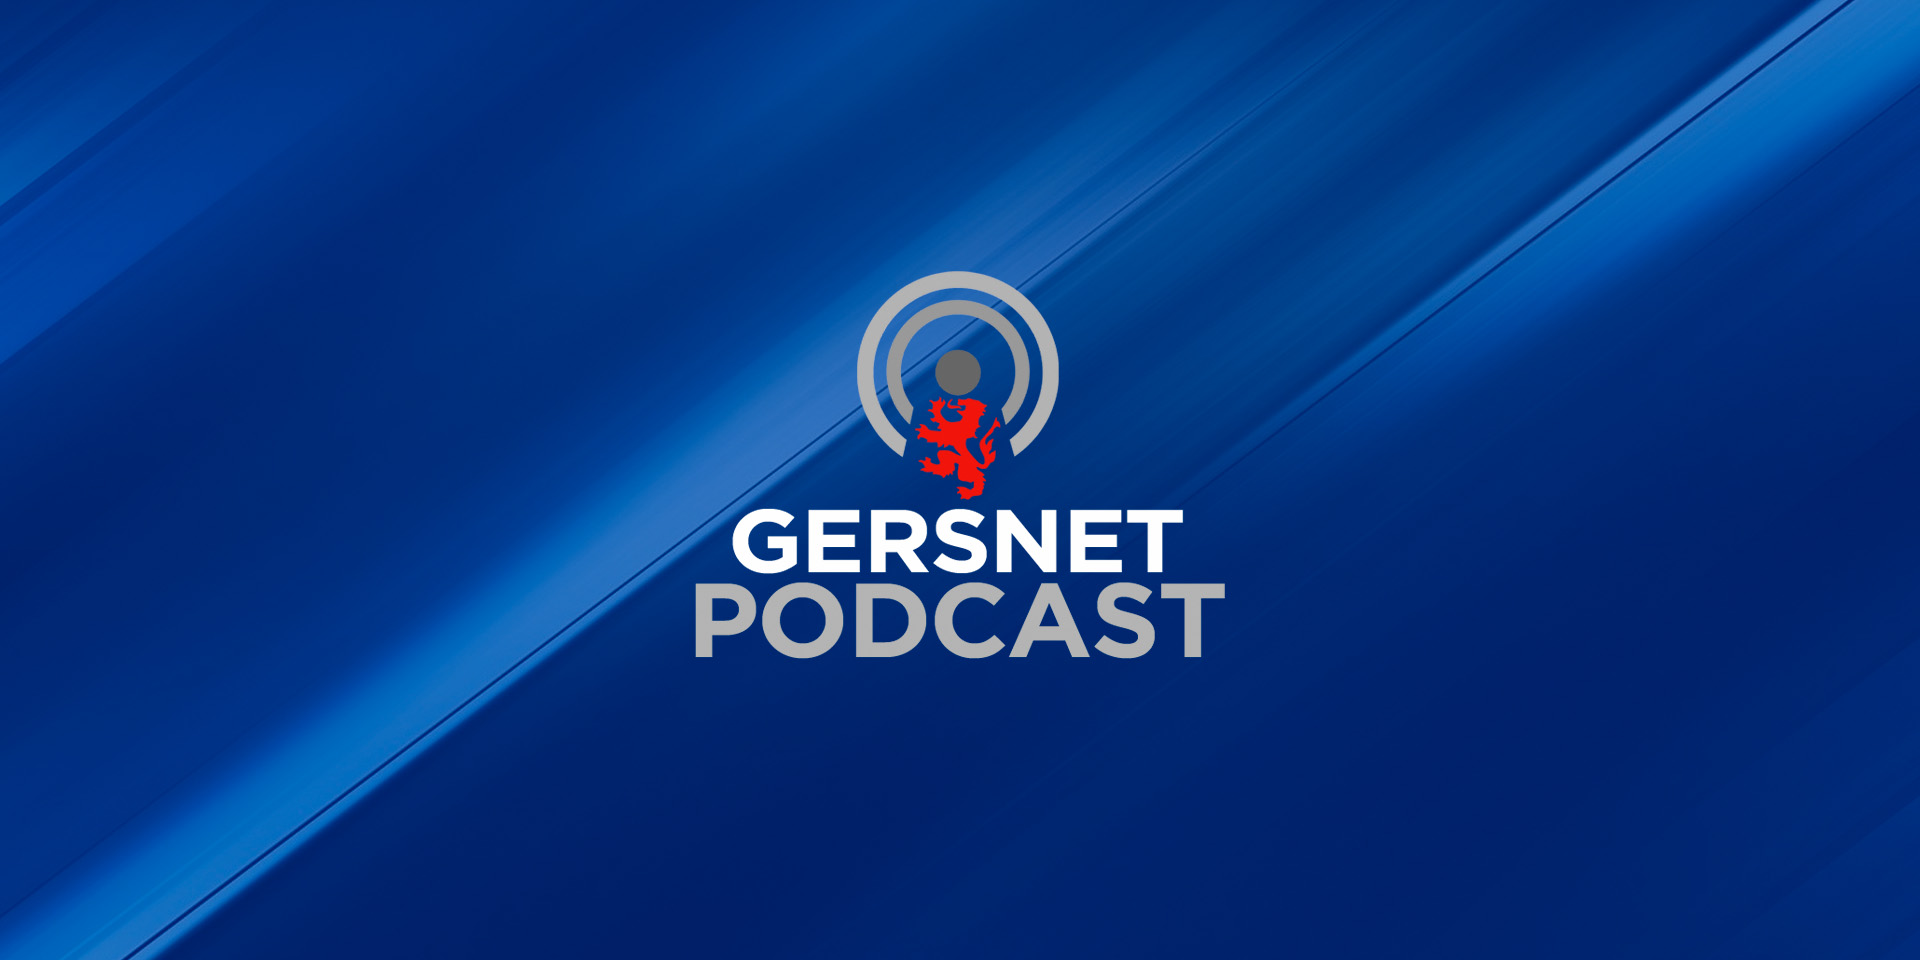 Gersnet Podcast 309 - Sons put to sword in storm